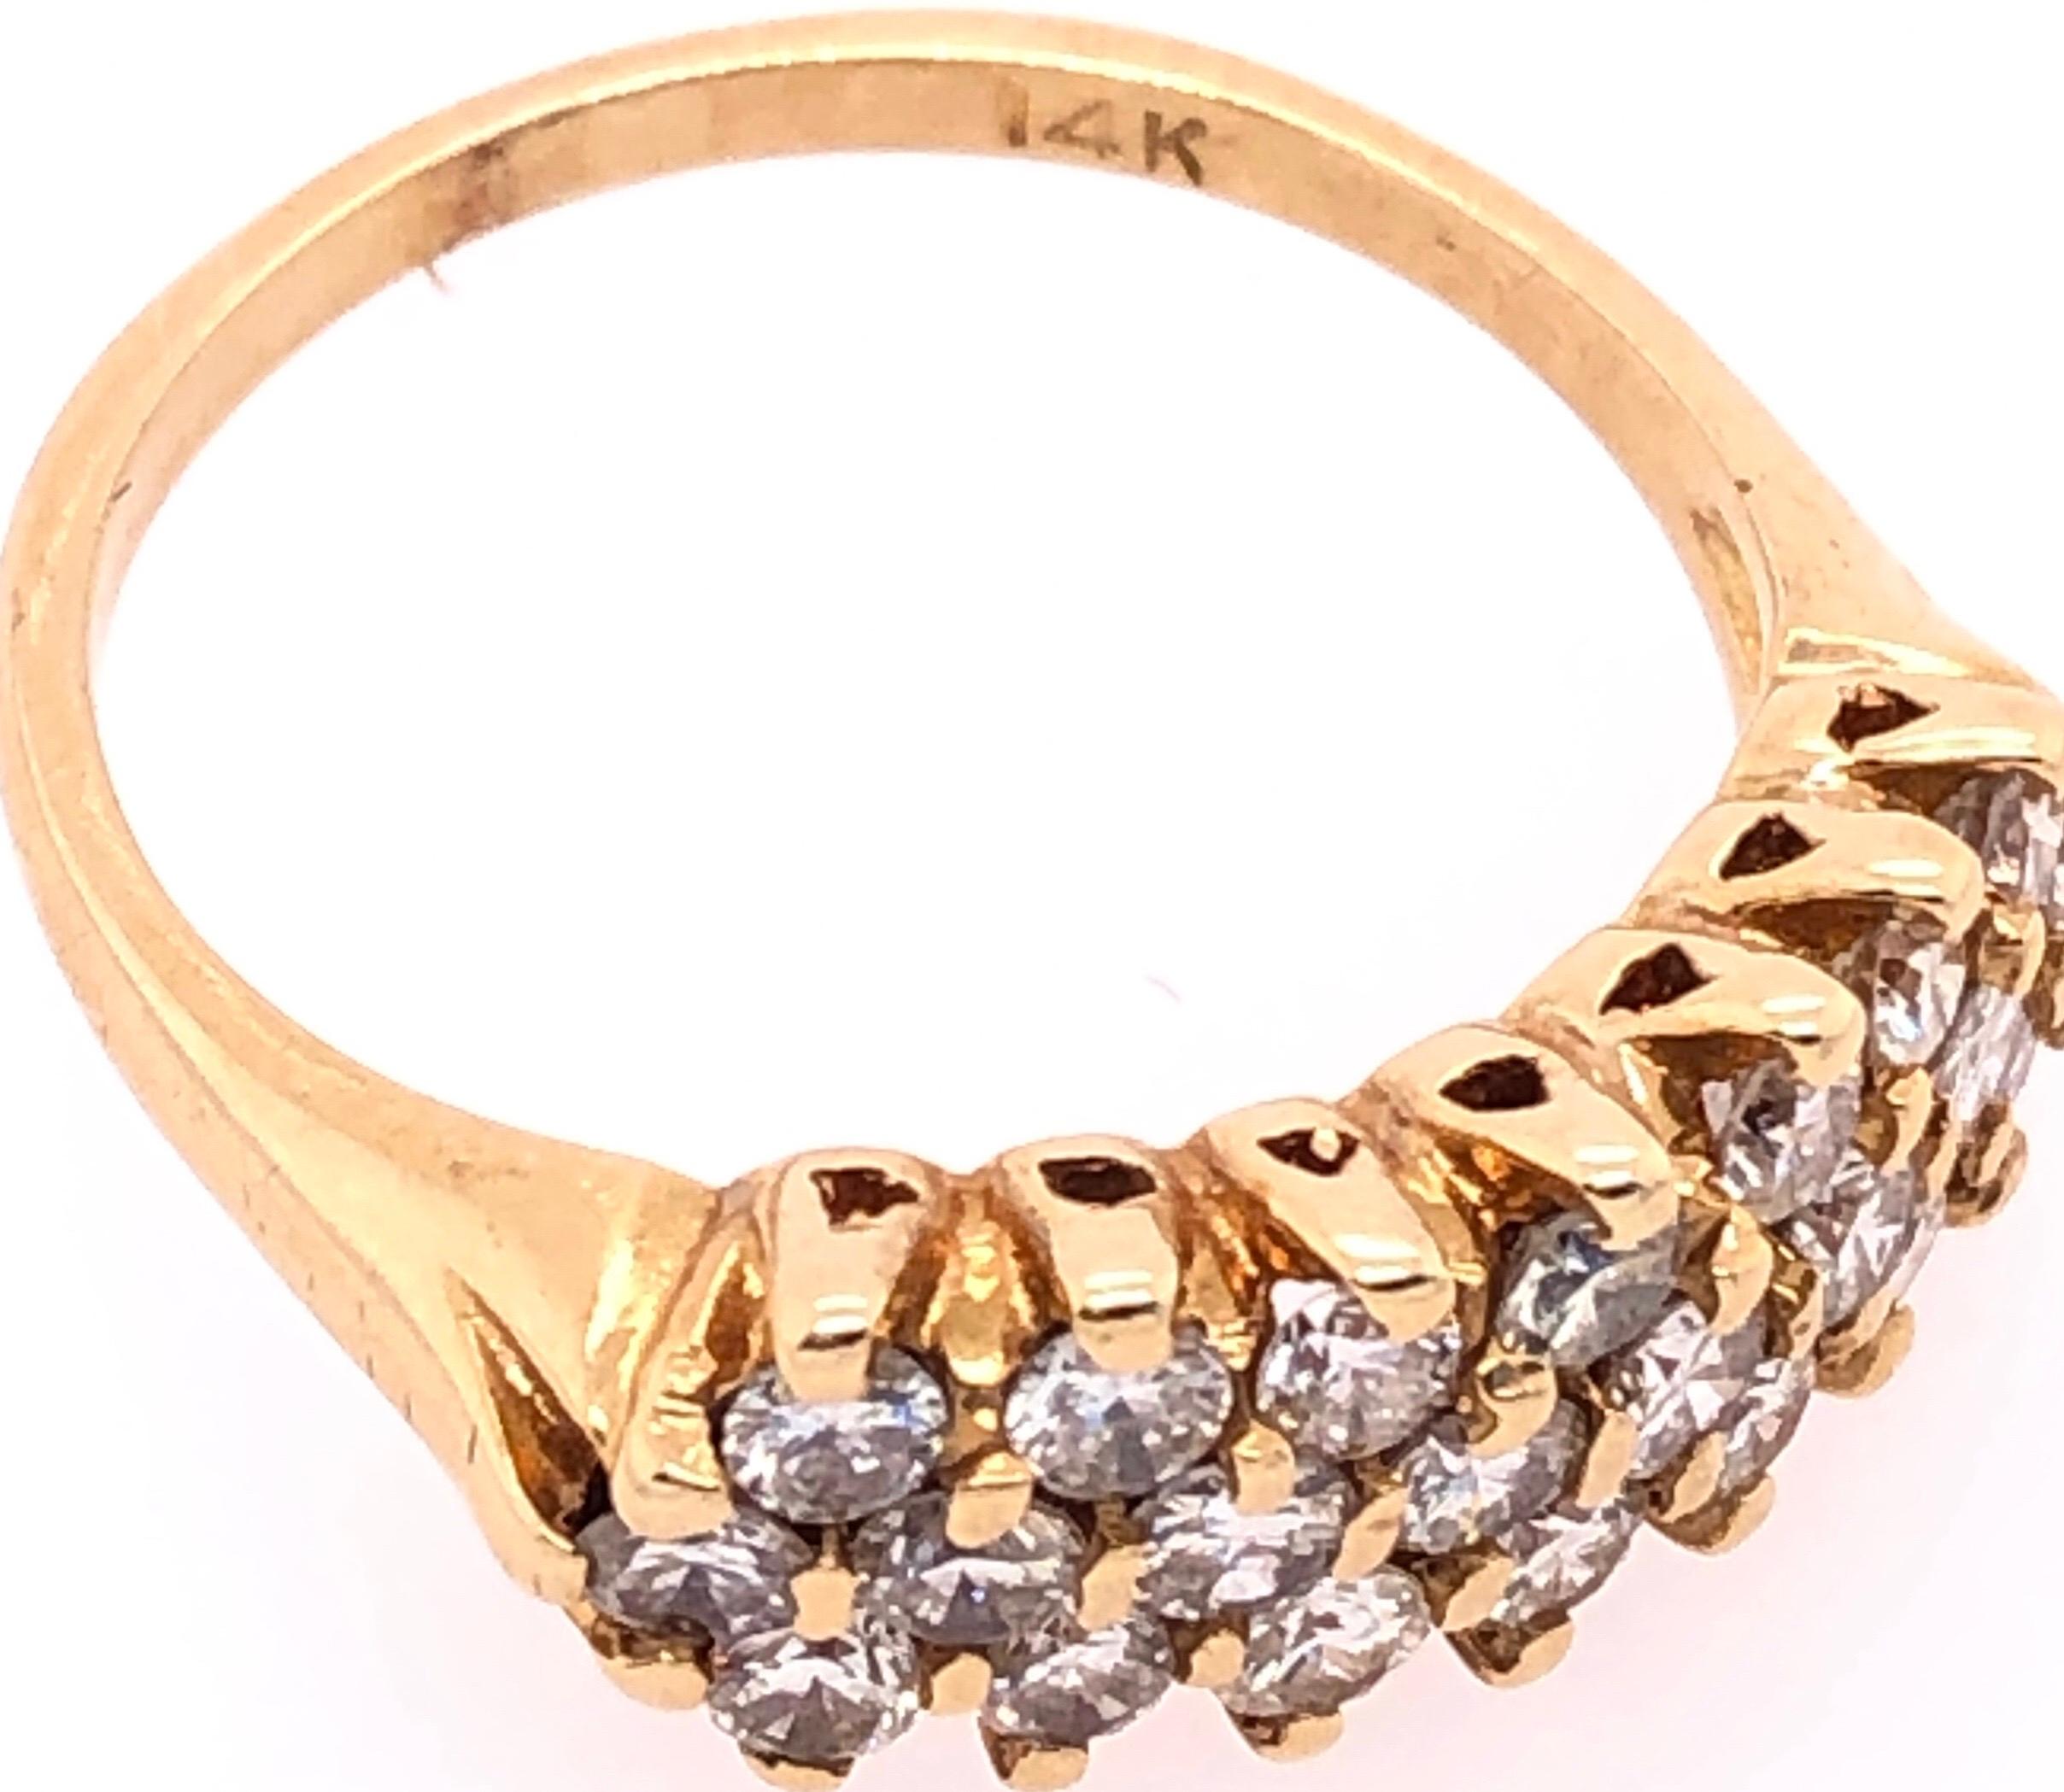 14 Karat Yellow Gold With Triple Tier Diamonds Wedding / Anniversary / Cocktail Ring 
1.50 total diamond weight.
size 7
3 grams total weight.